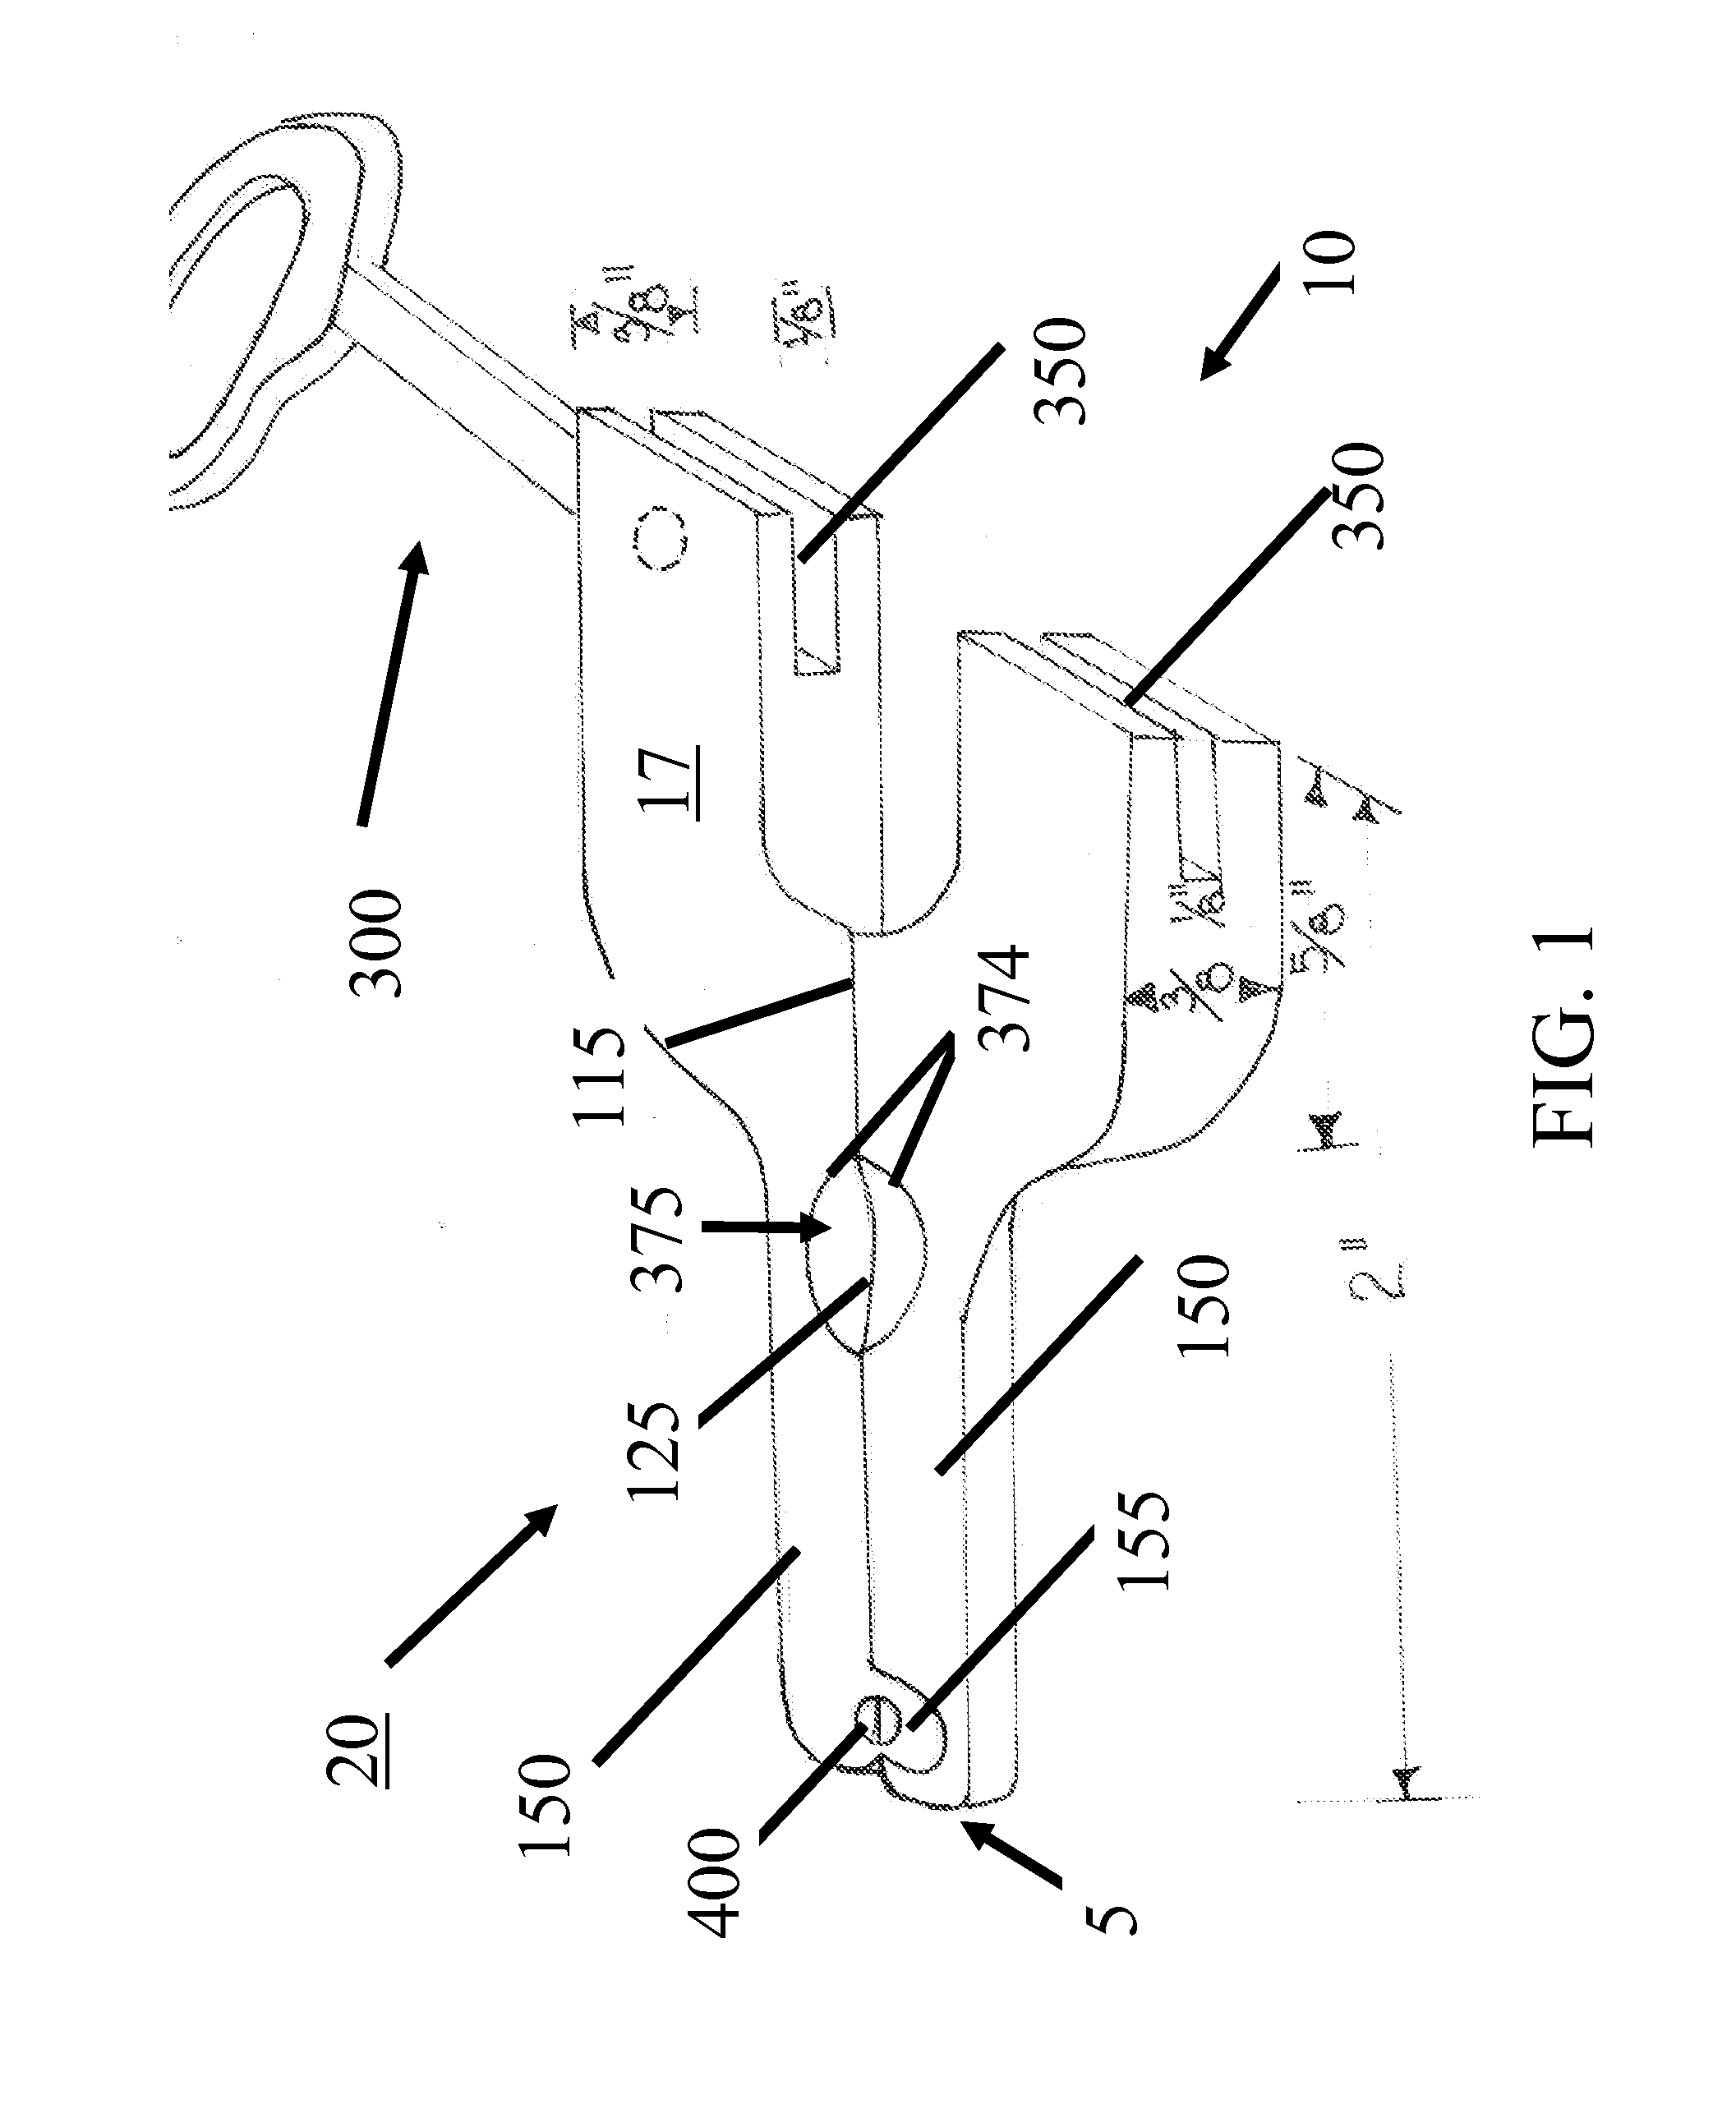 Devices and Methods for Removing Unwanted Tissue